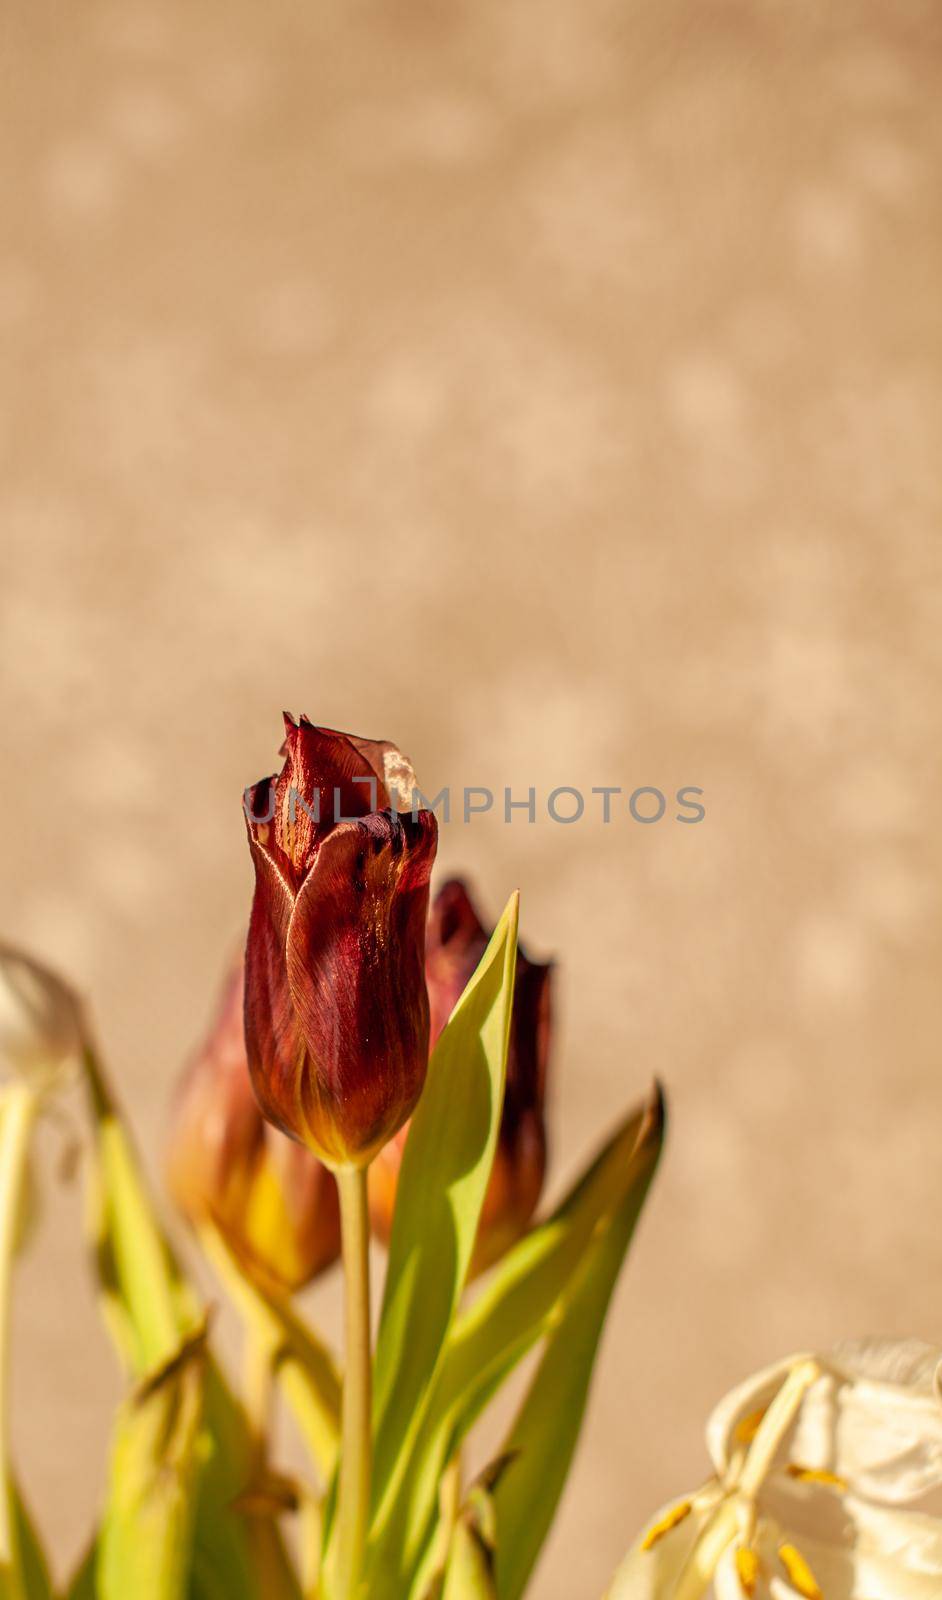 Flowers tulips at home in the warm rays of the winter sun. Beautiful decor and greeting card.